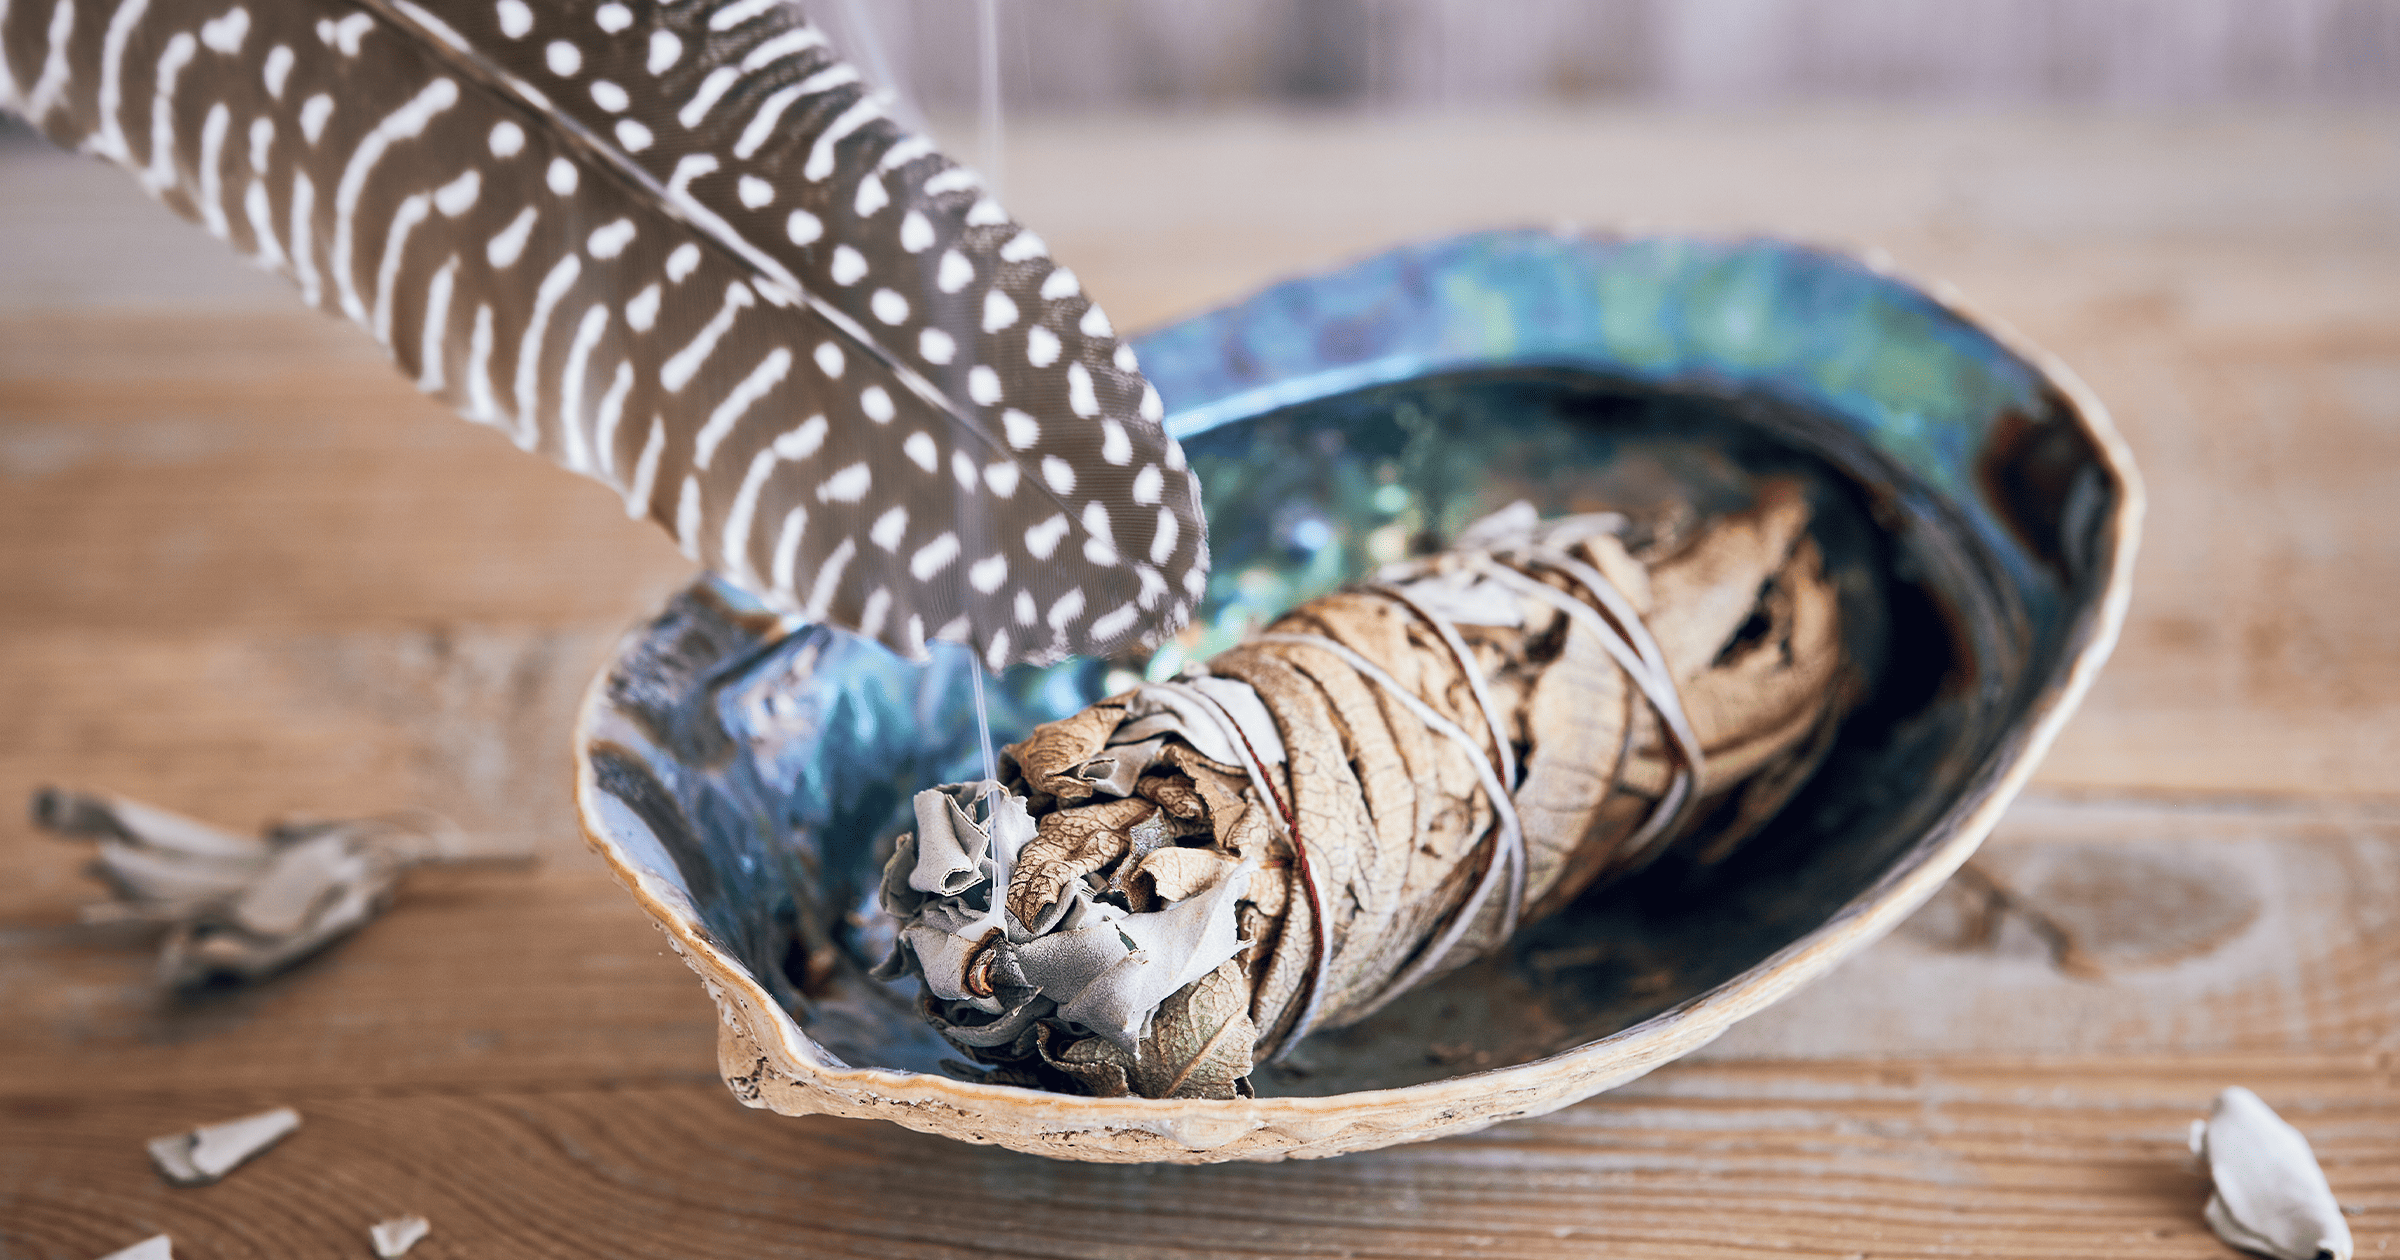 A traditoinal sage smudge stick lays in an ornate blue dish gently smoking ahead of being used to cleanse a space for Feng Shui